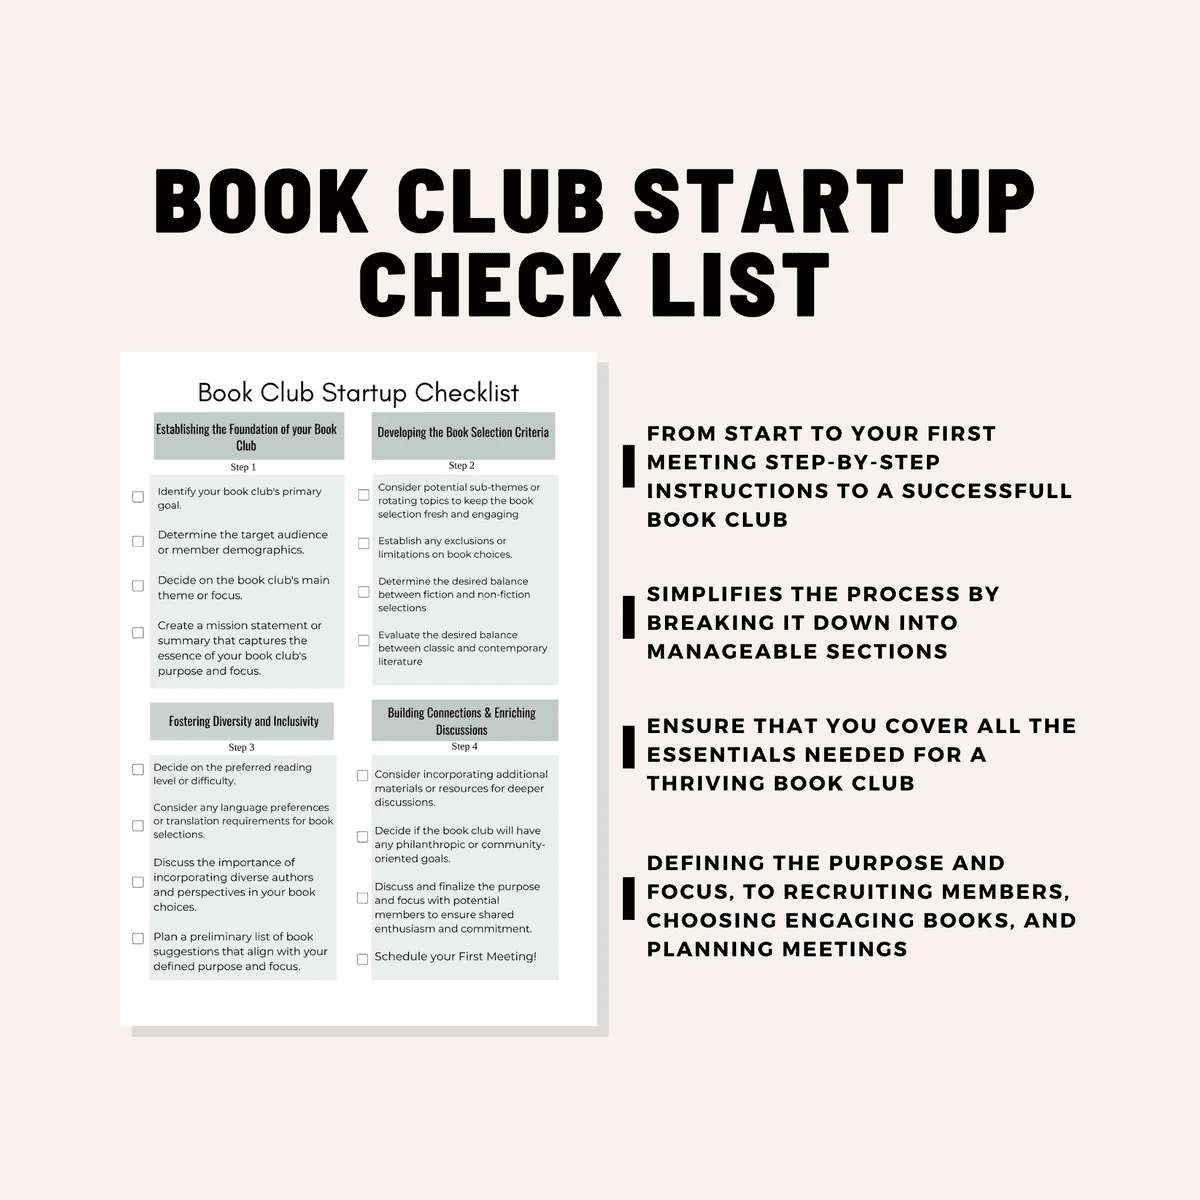 Start up check list to help create your Mommy  Book Club